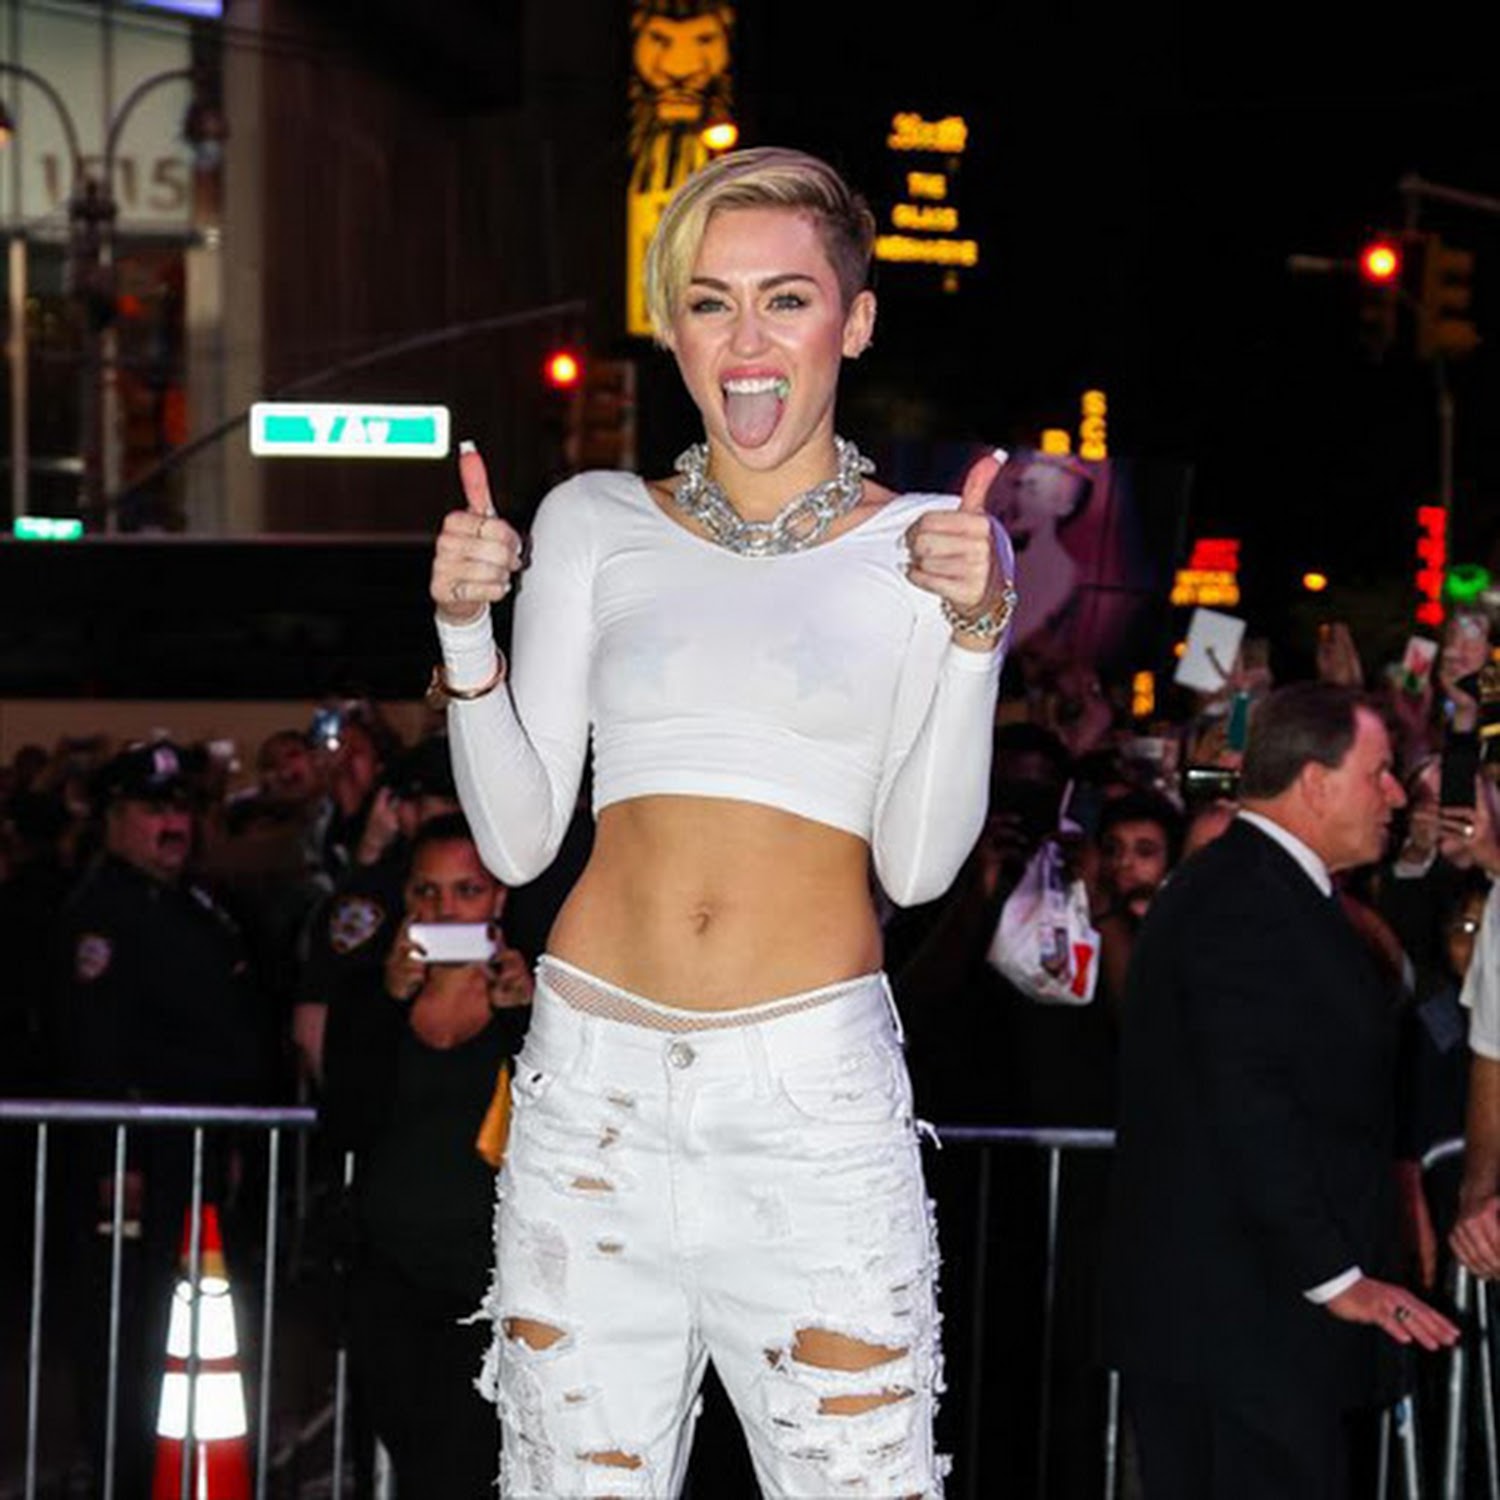 Miley Cyrus offered $1 million to direct porn film